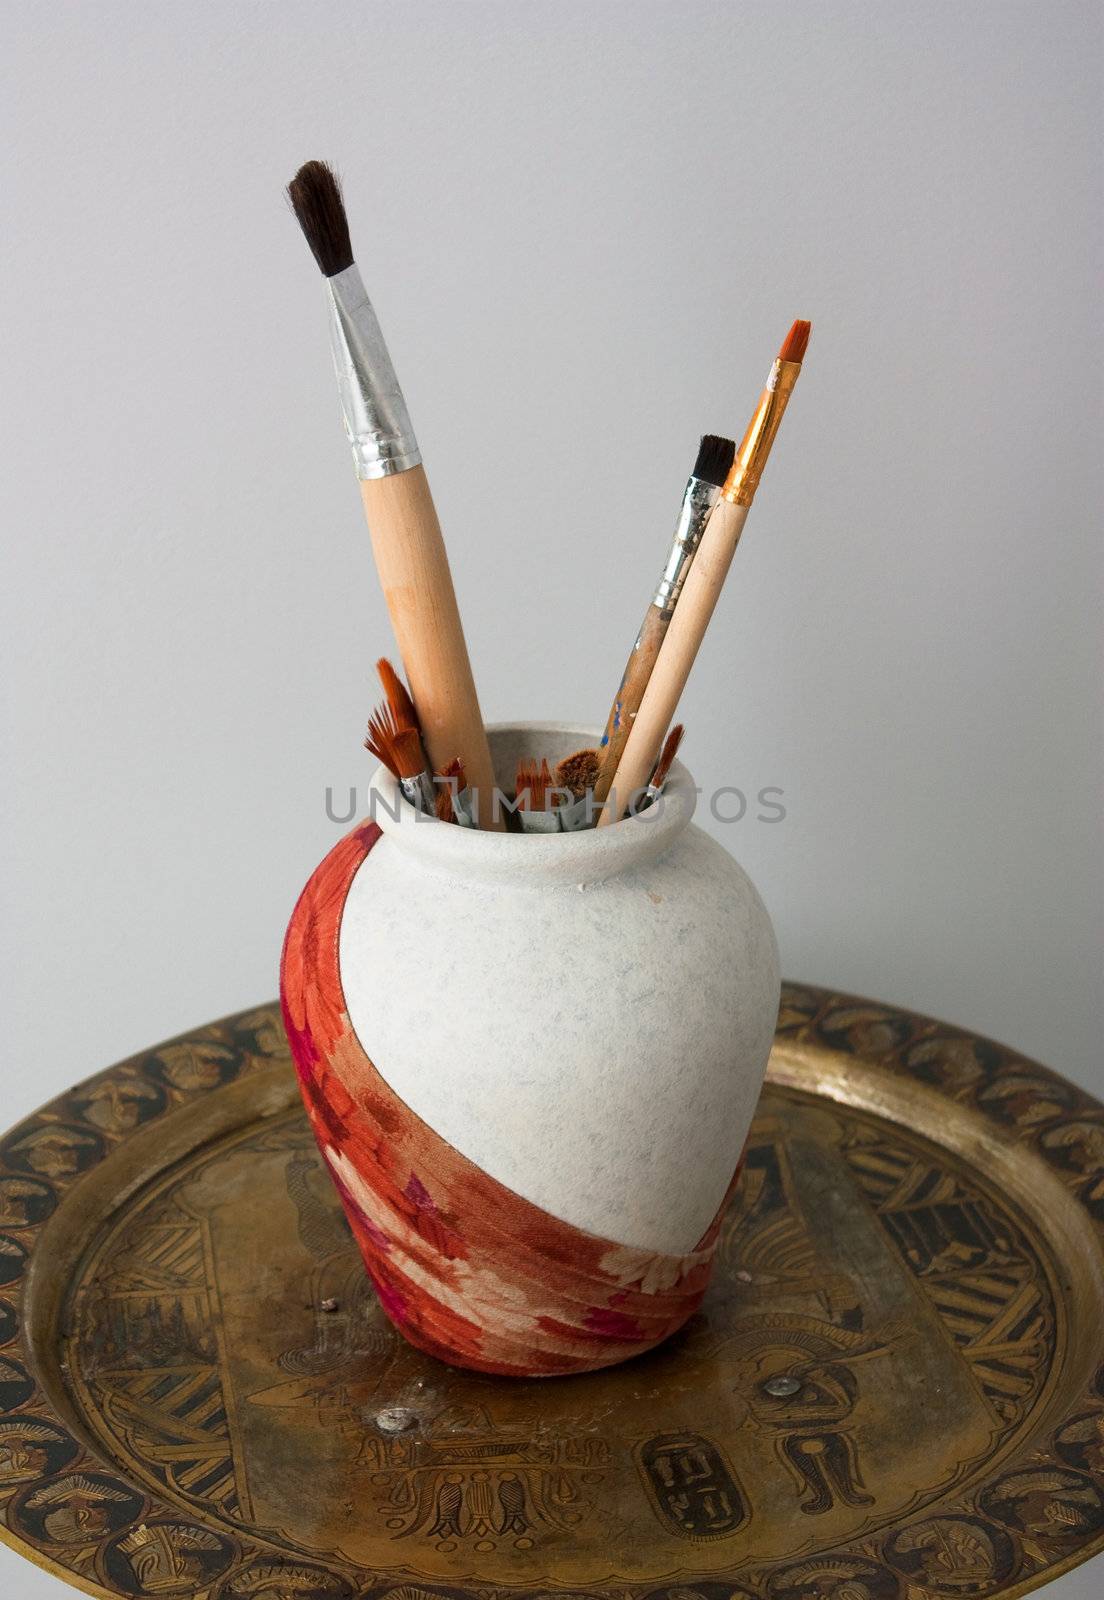 vessel with artistic brushes on stand